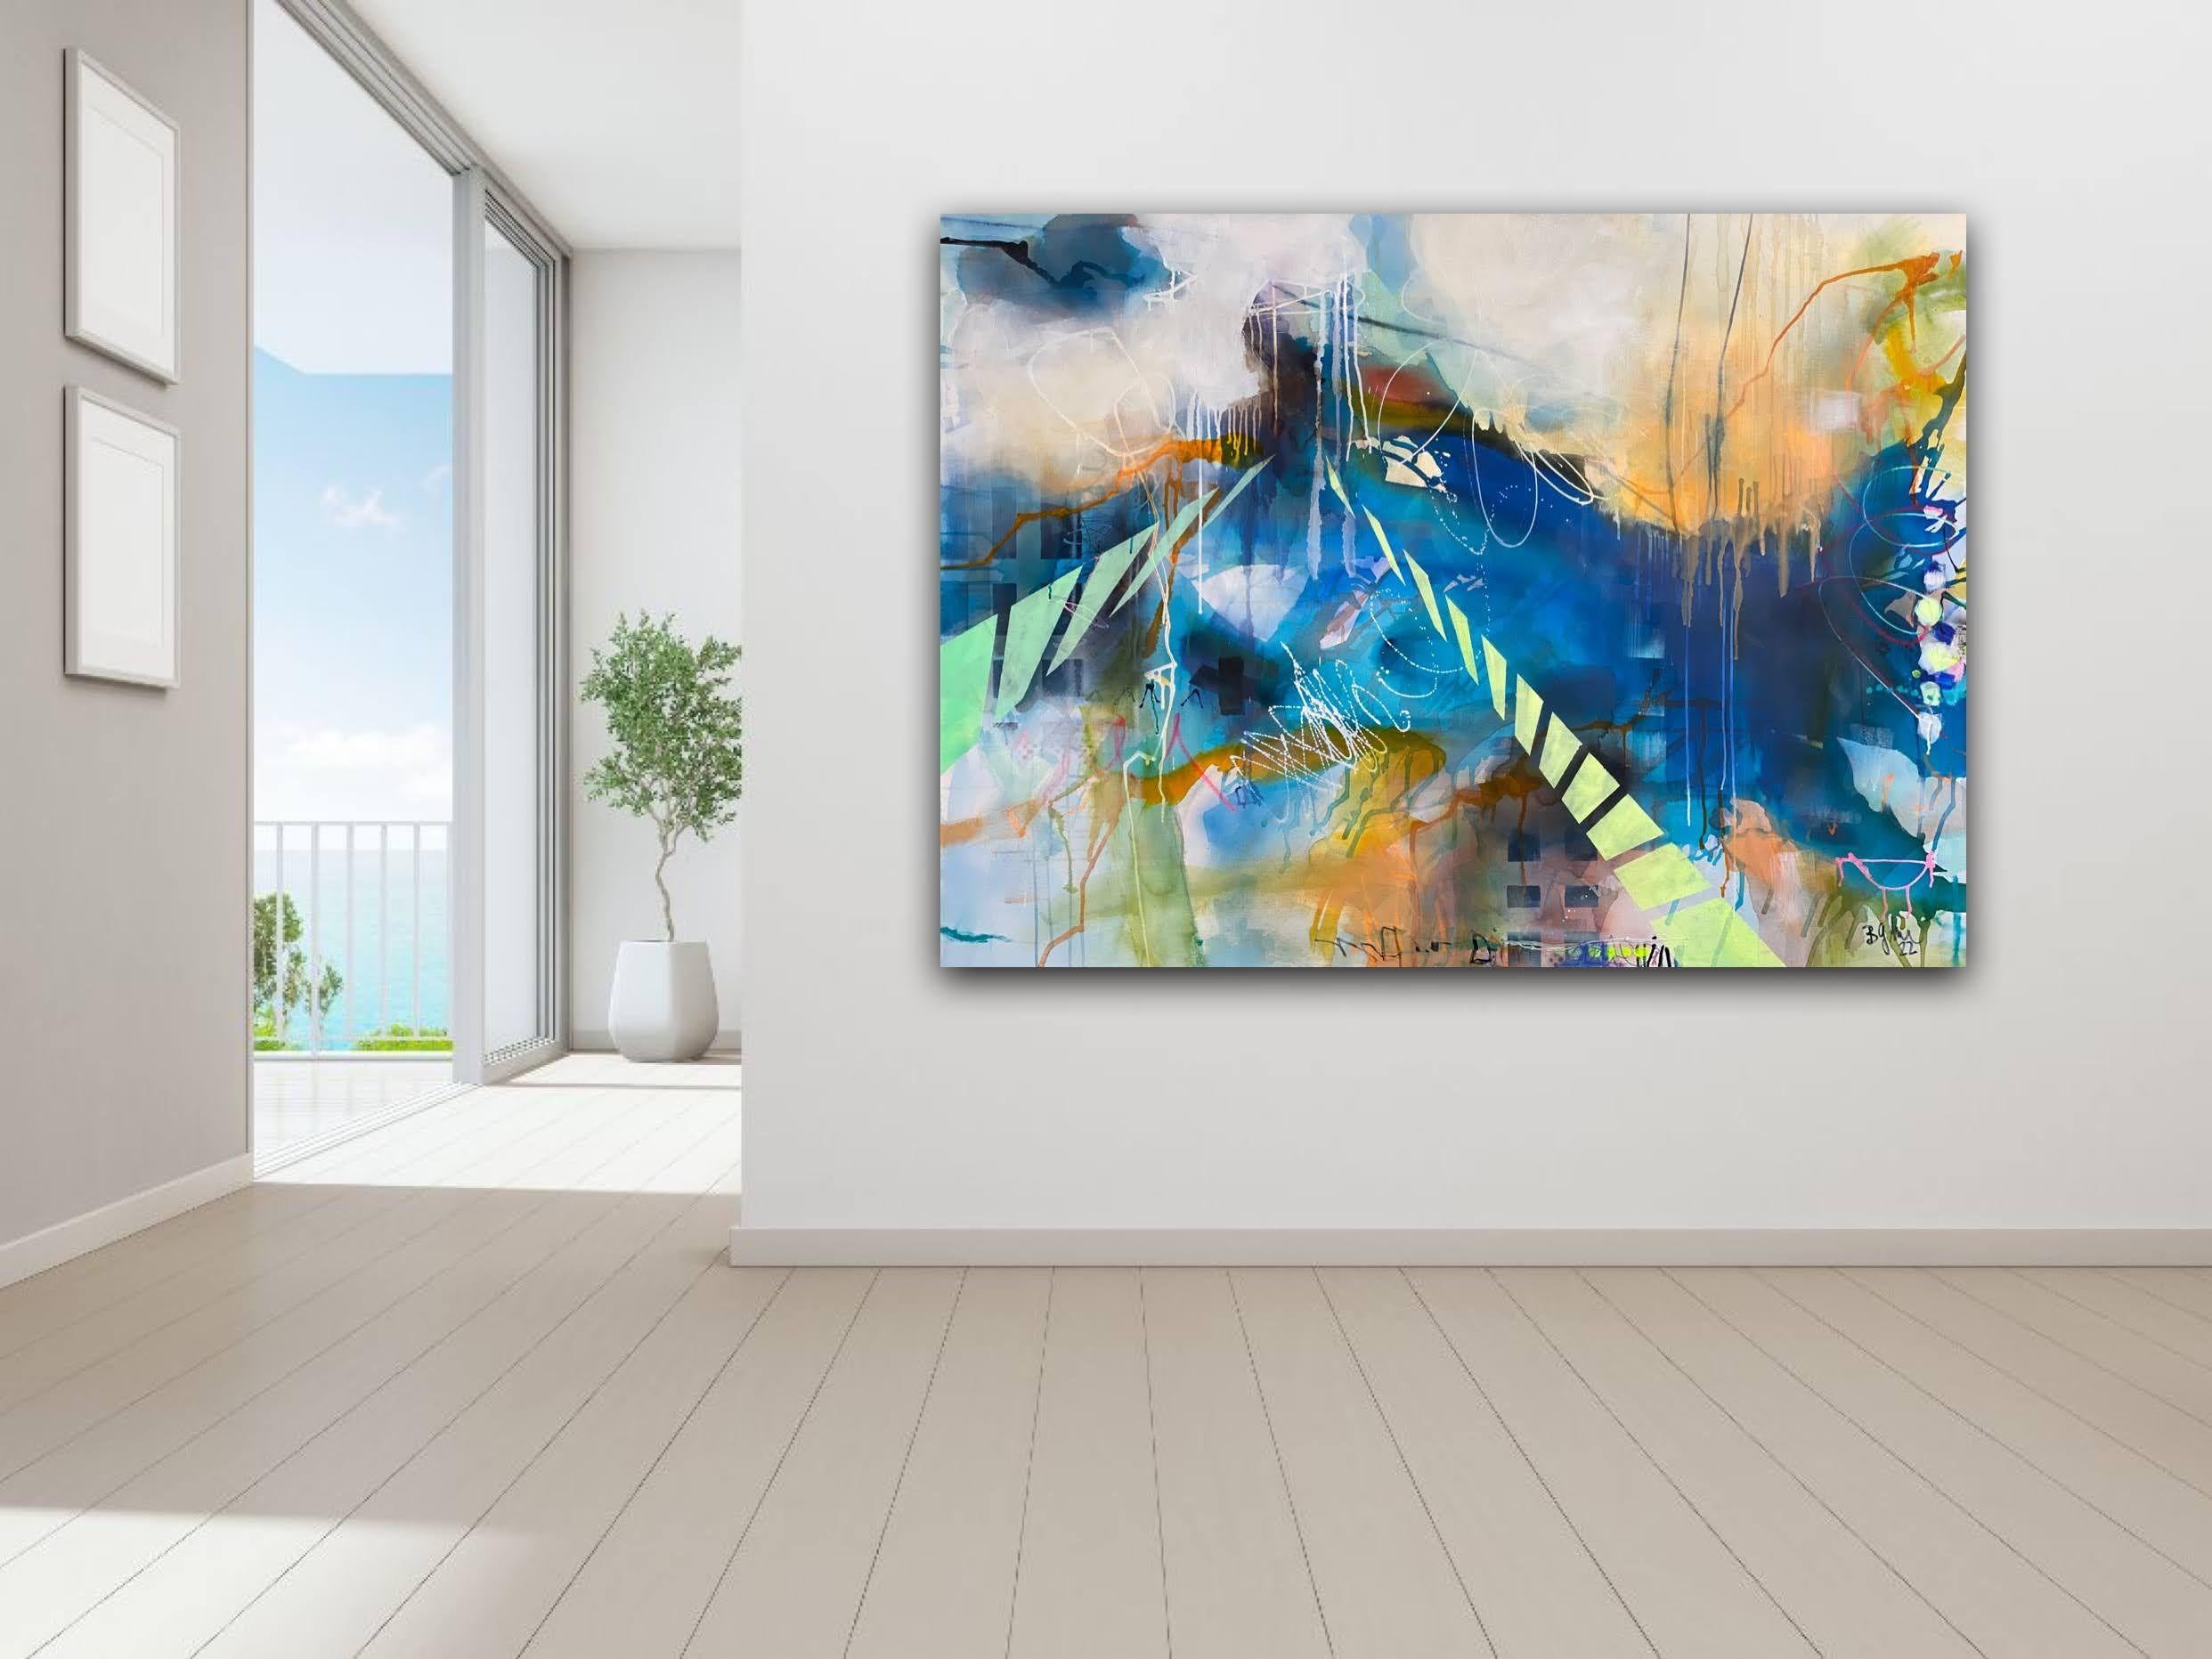 It is all a dream No.2 is a large abstract painting 120 cm/47.24 in H x 160 cm/62.99 in W, 4 cm/1,56 in deep. The painting is mixed media ( acrylics, spray paint, ink, neon paint, soft pastels ) on high quality canvas.    I love the song 